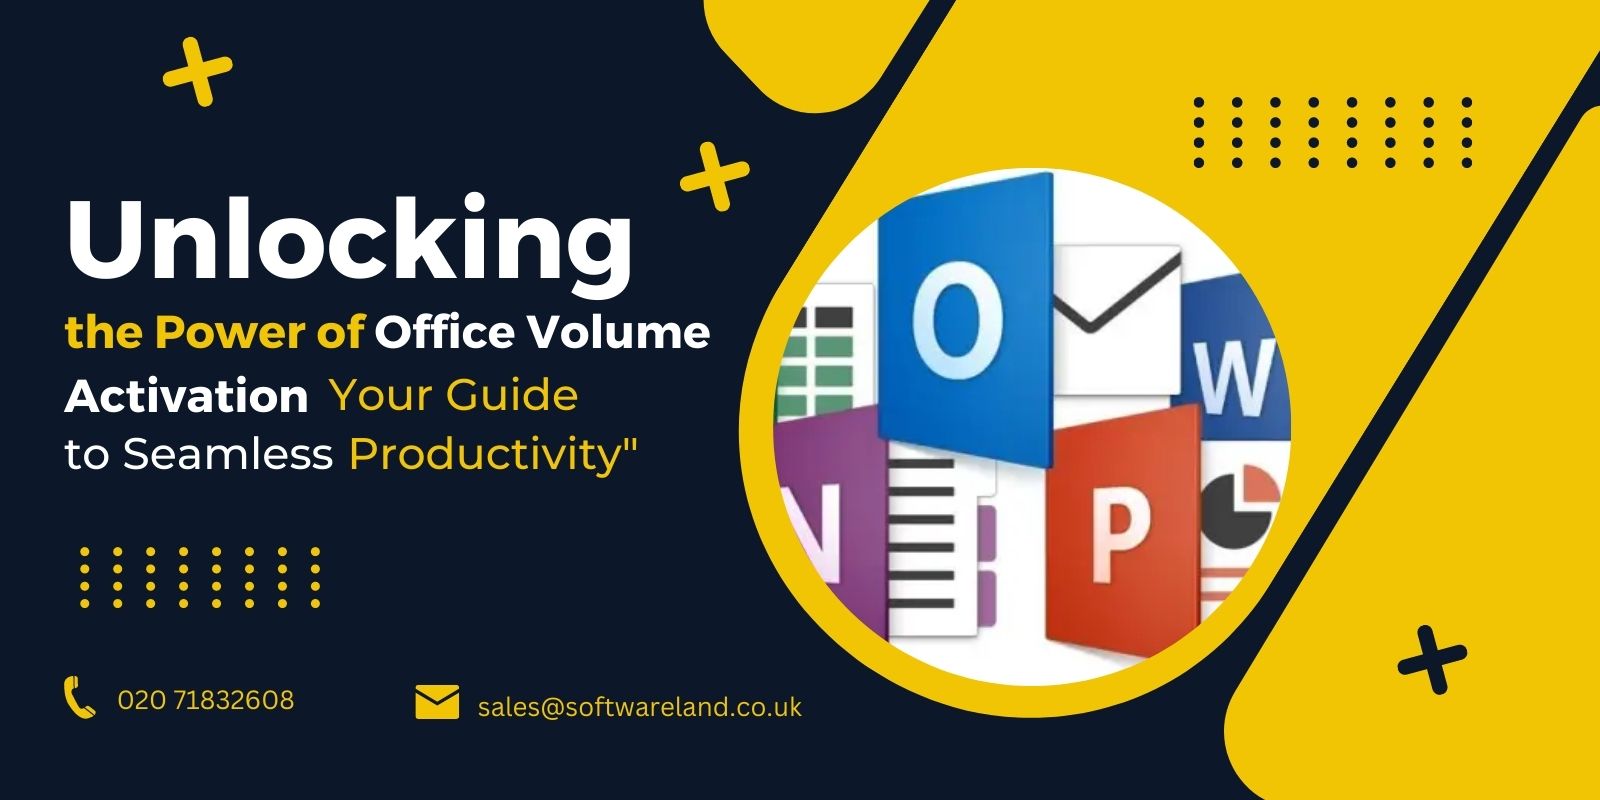 Unlocking the Power of Office Volume Activation: Guide to Seamless Productivity